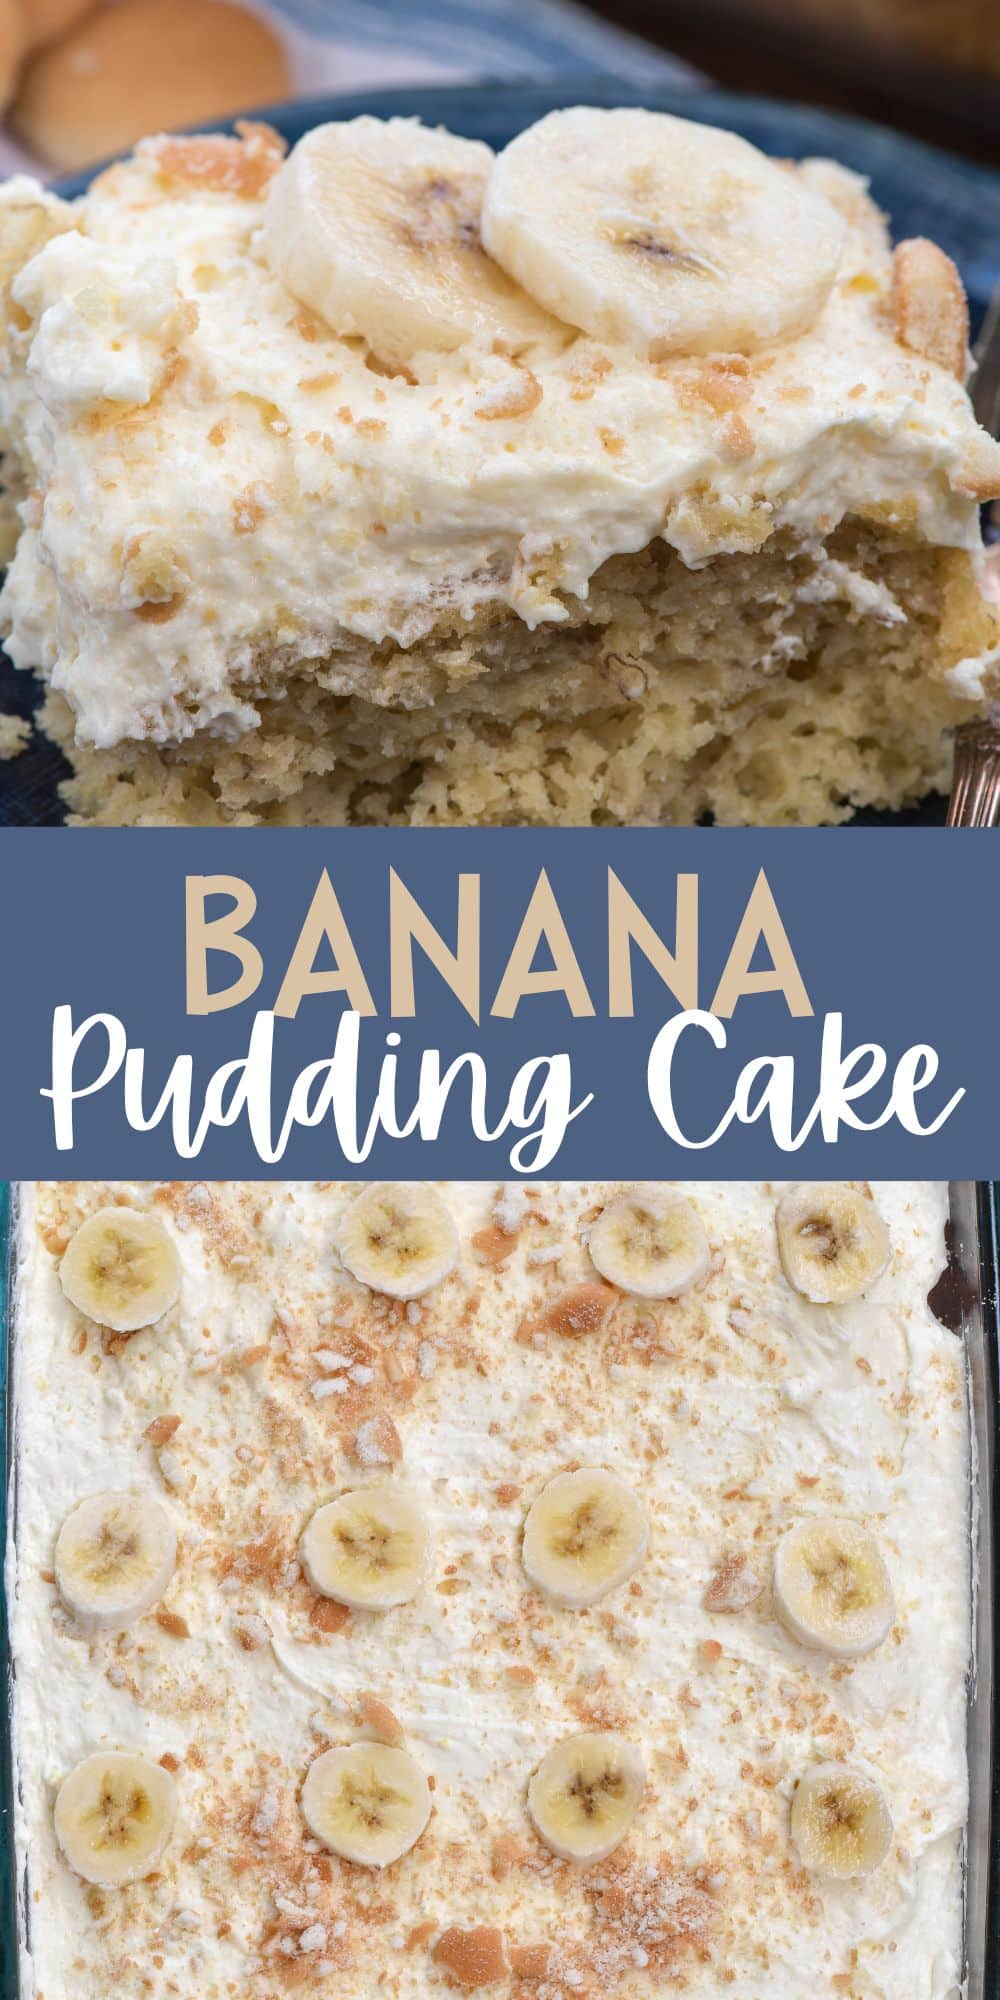 two photos of pudding cake with slices of bananas on top with words on the image.